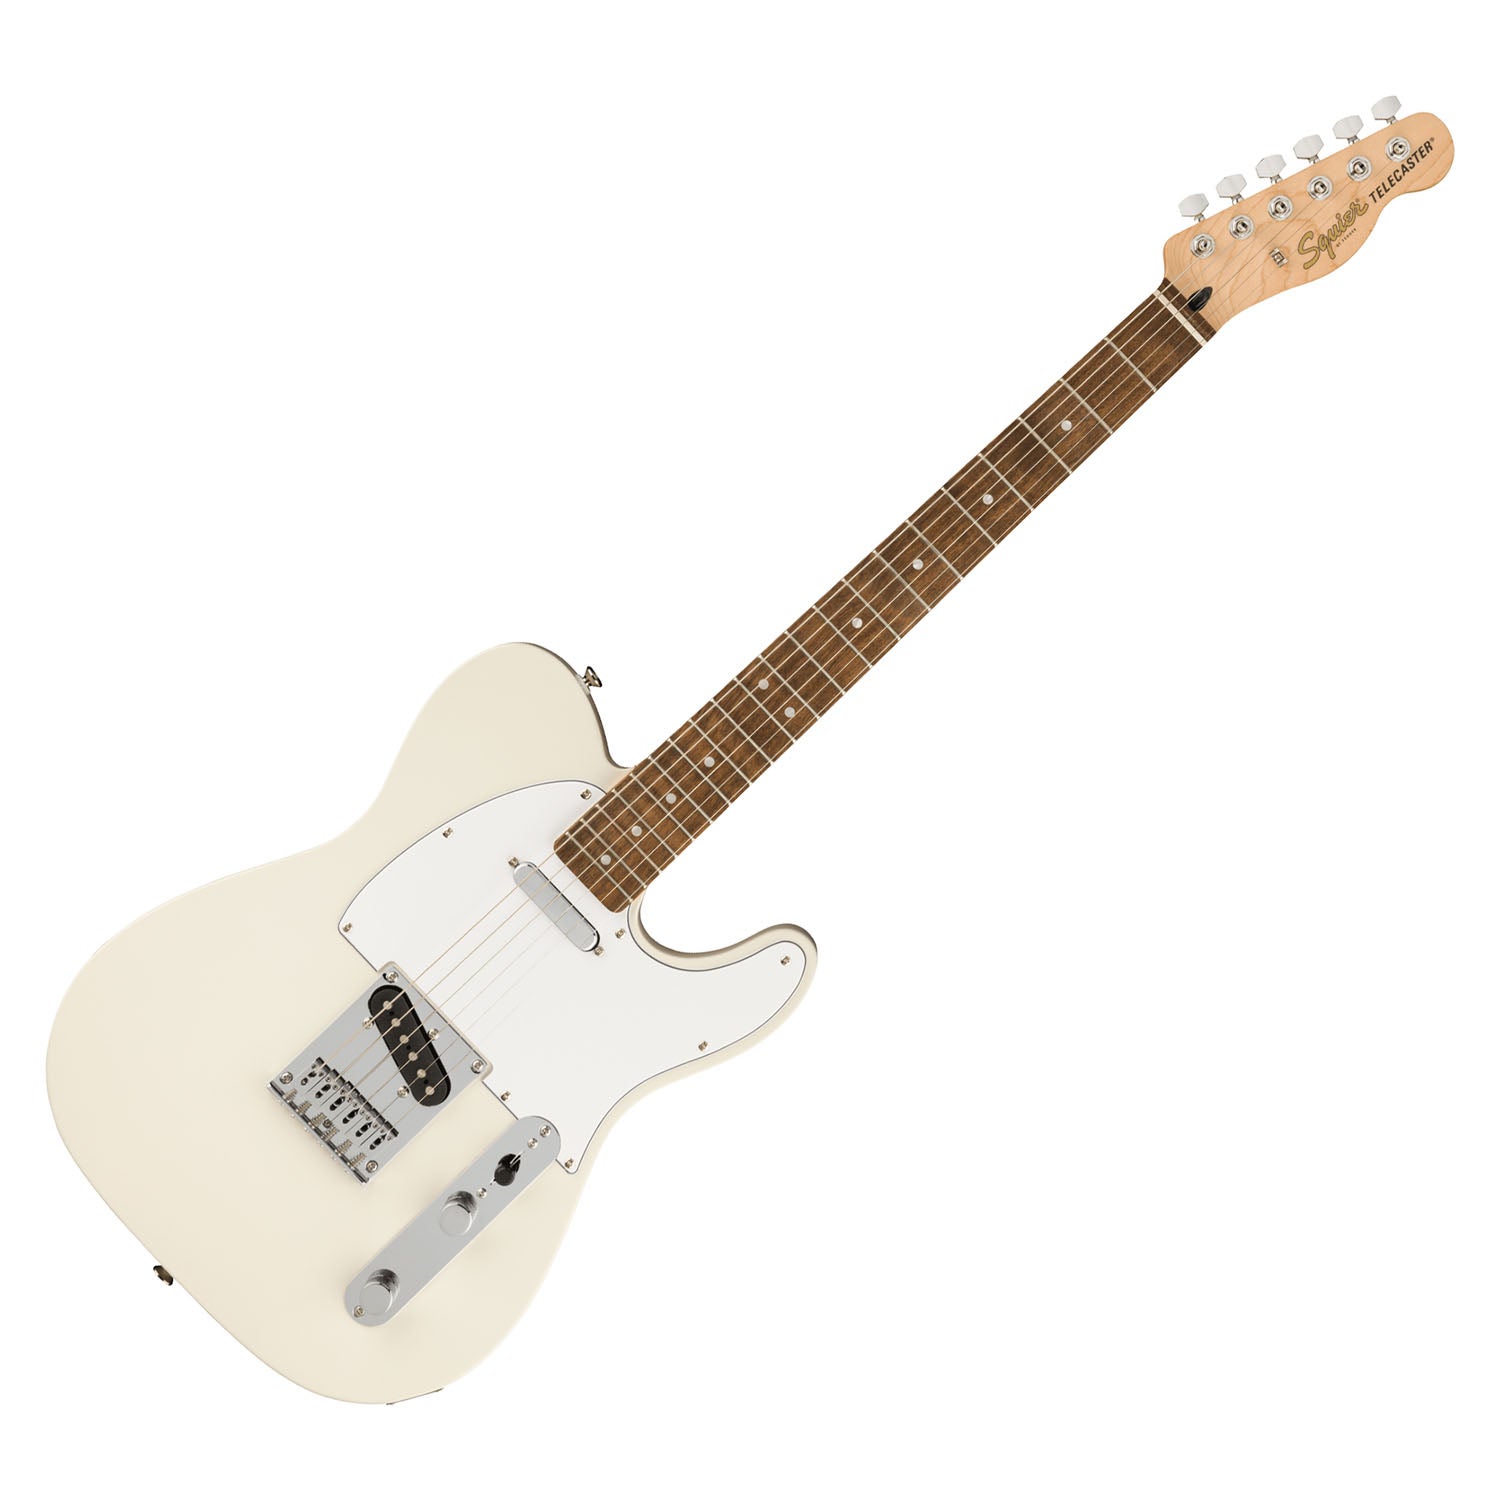 Fender 0378200505 Squier Affinity Series Telecaster Electric Guitar 